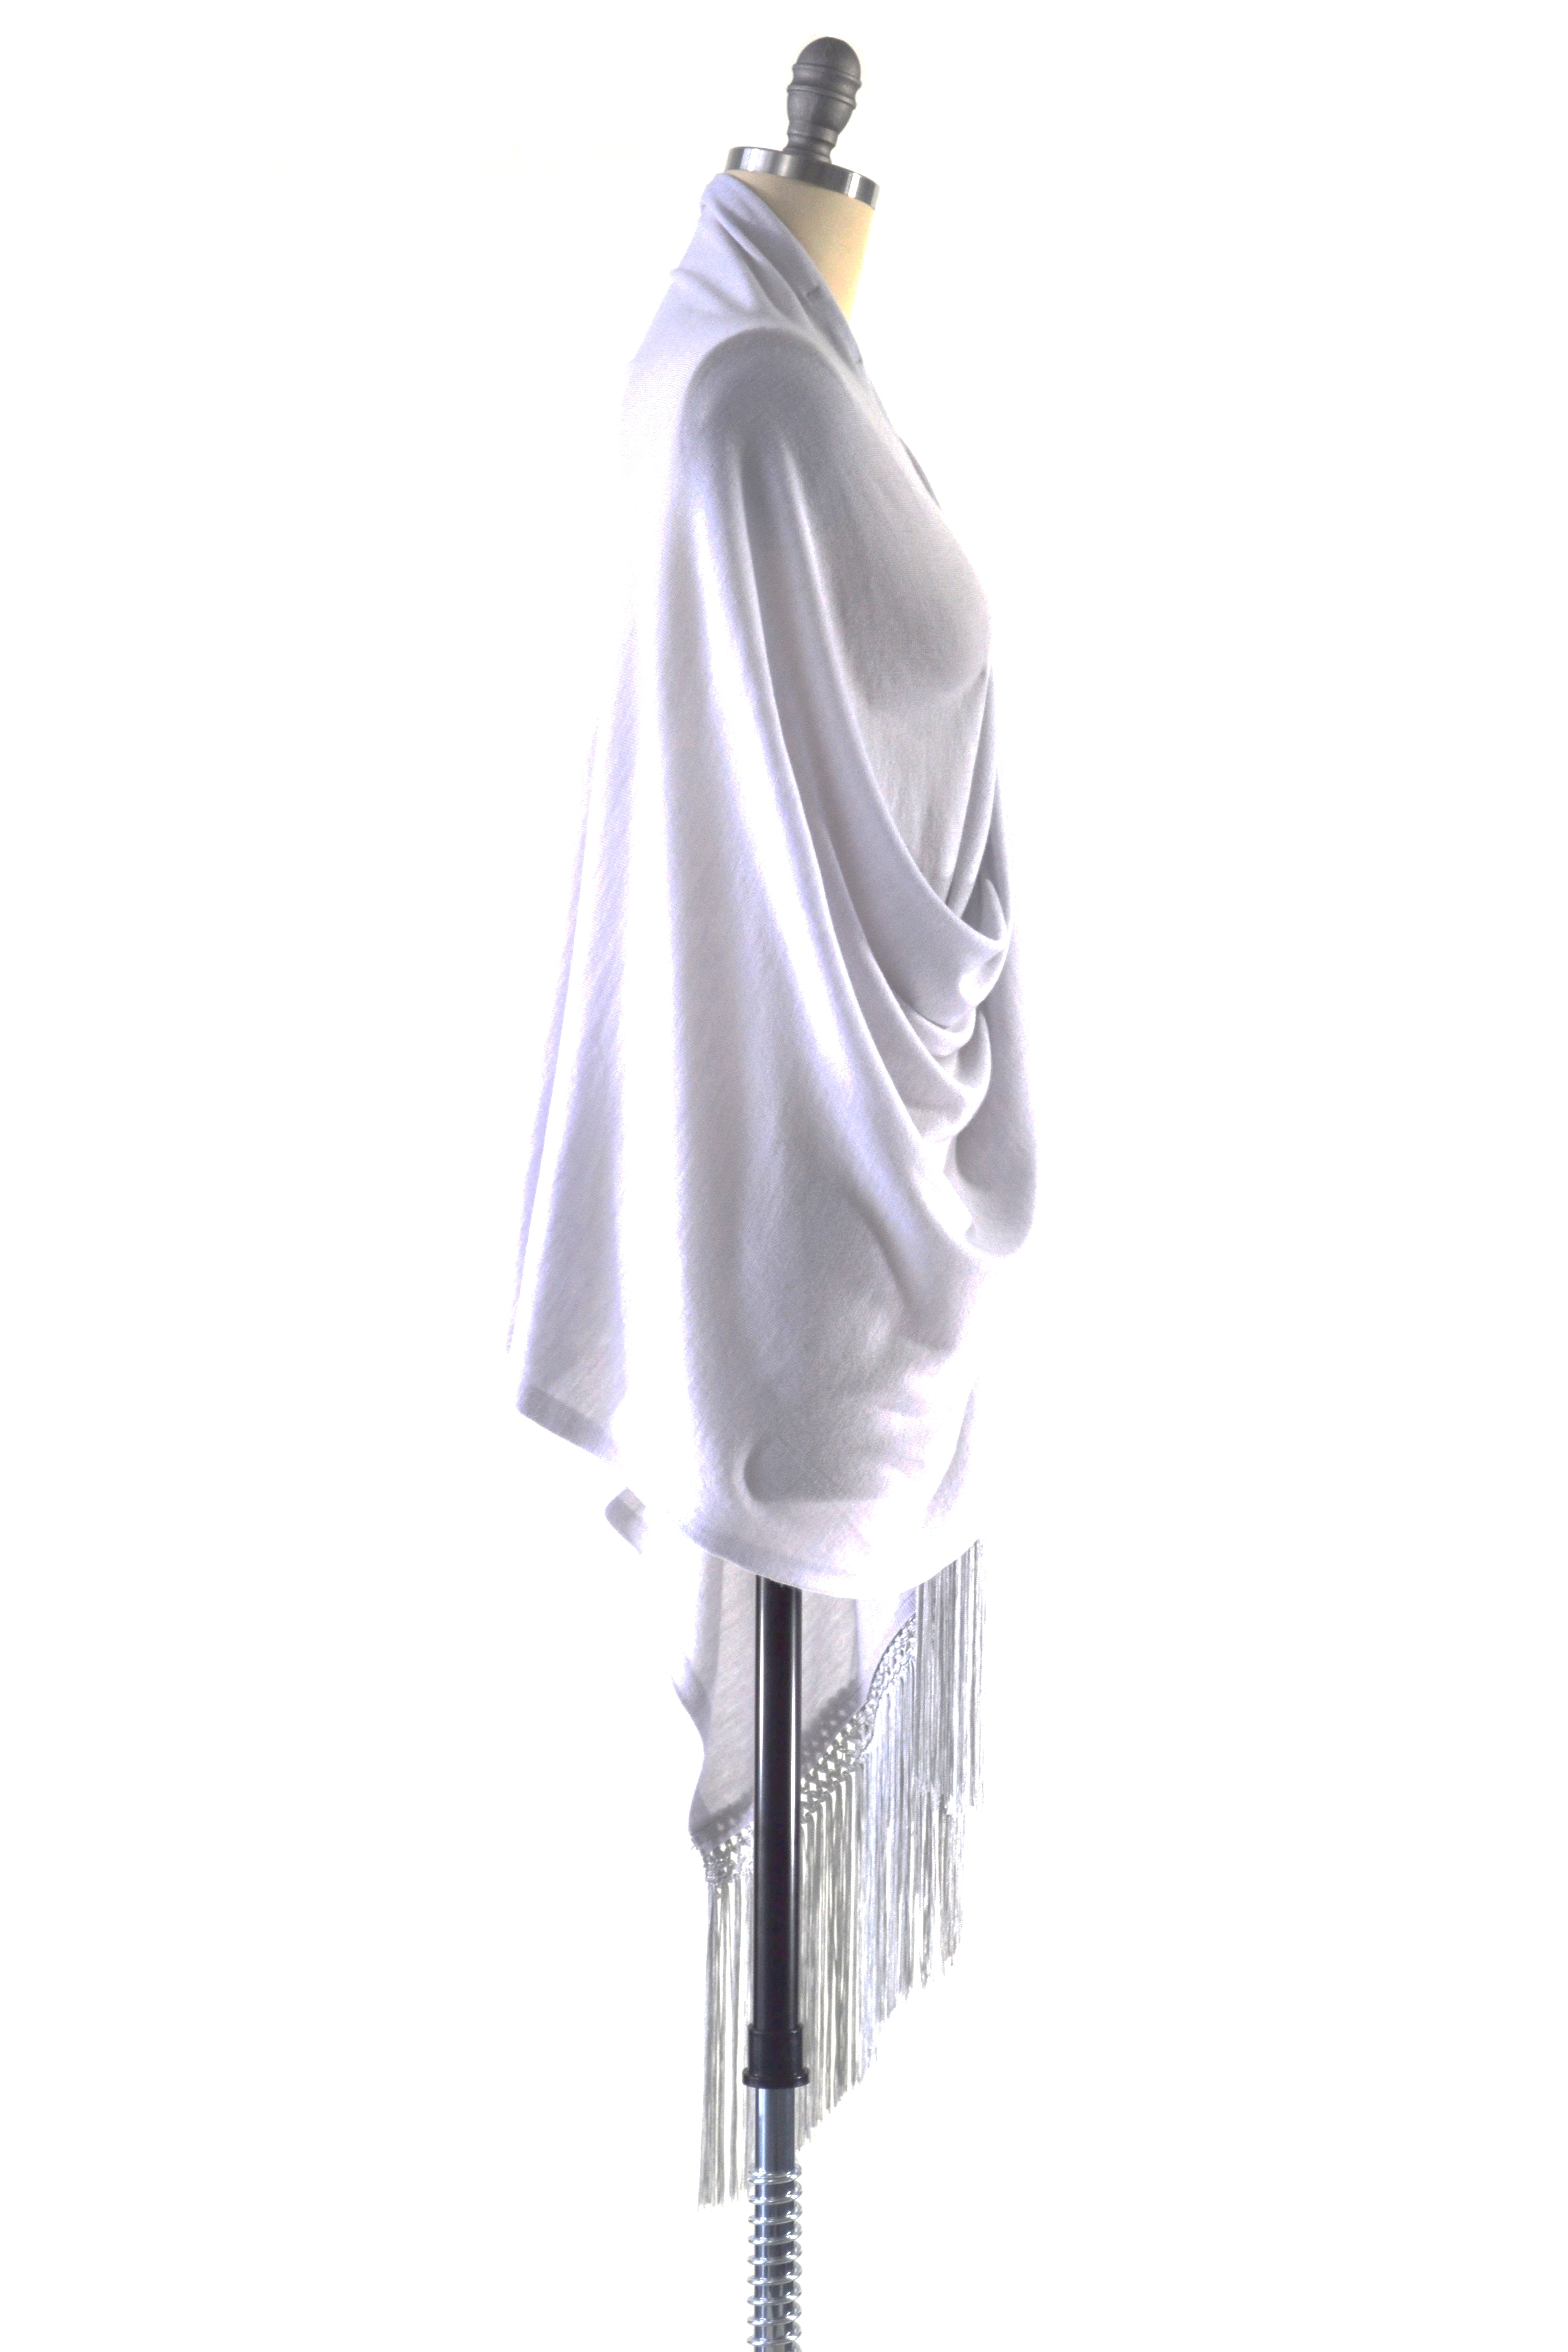 Fine Cashmere Wrap with Double Silky Macrame Fringe in Silver Gray